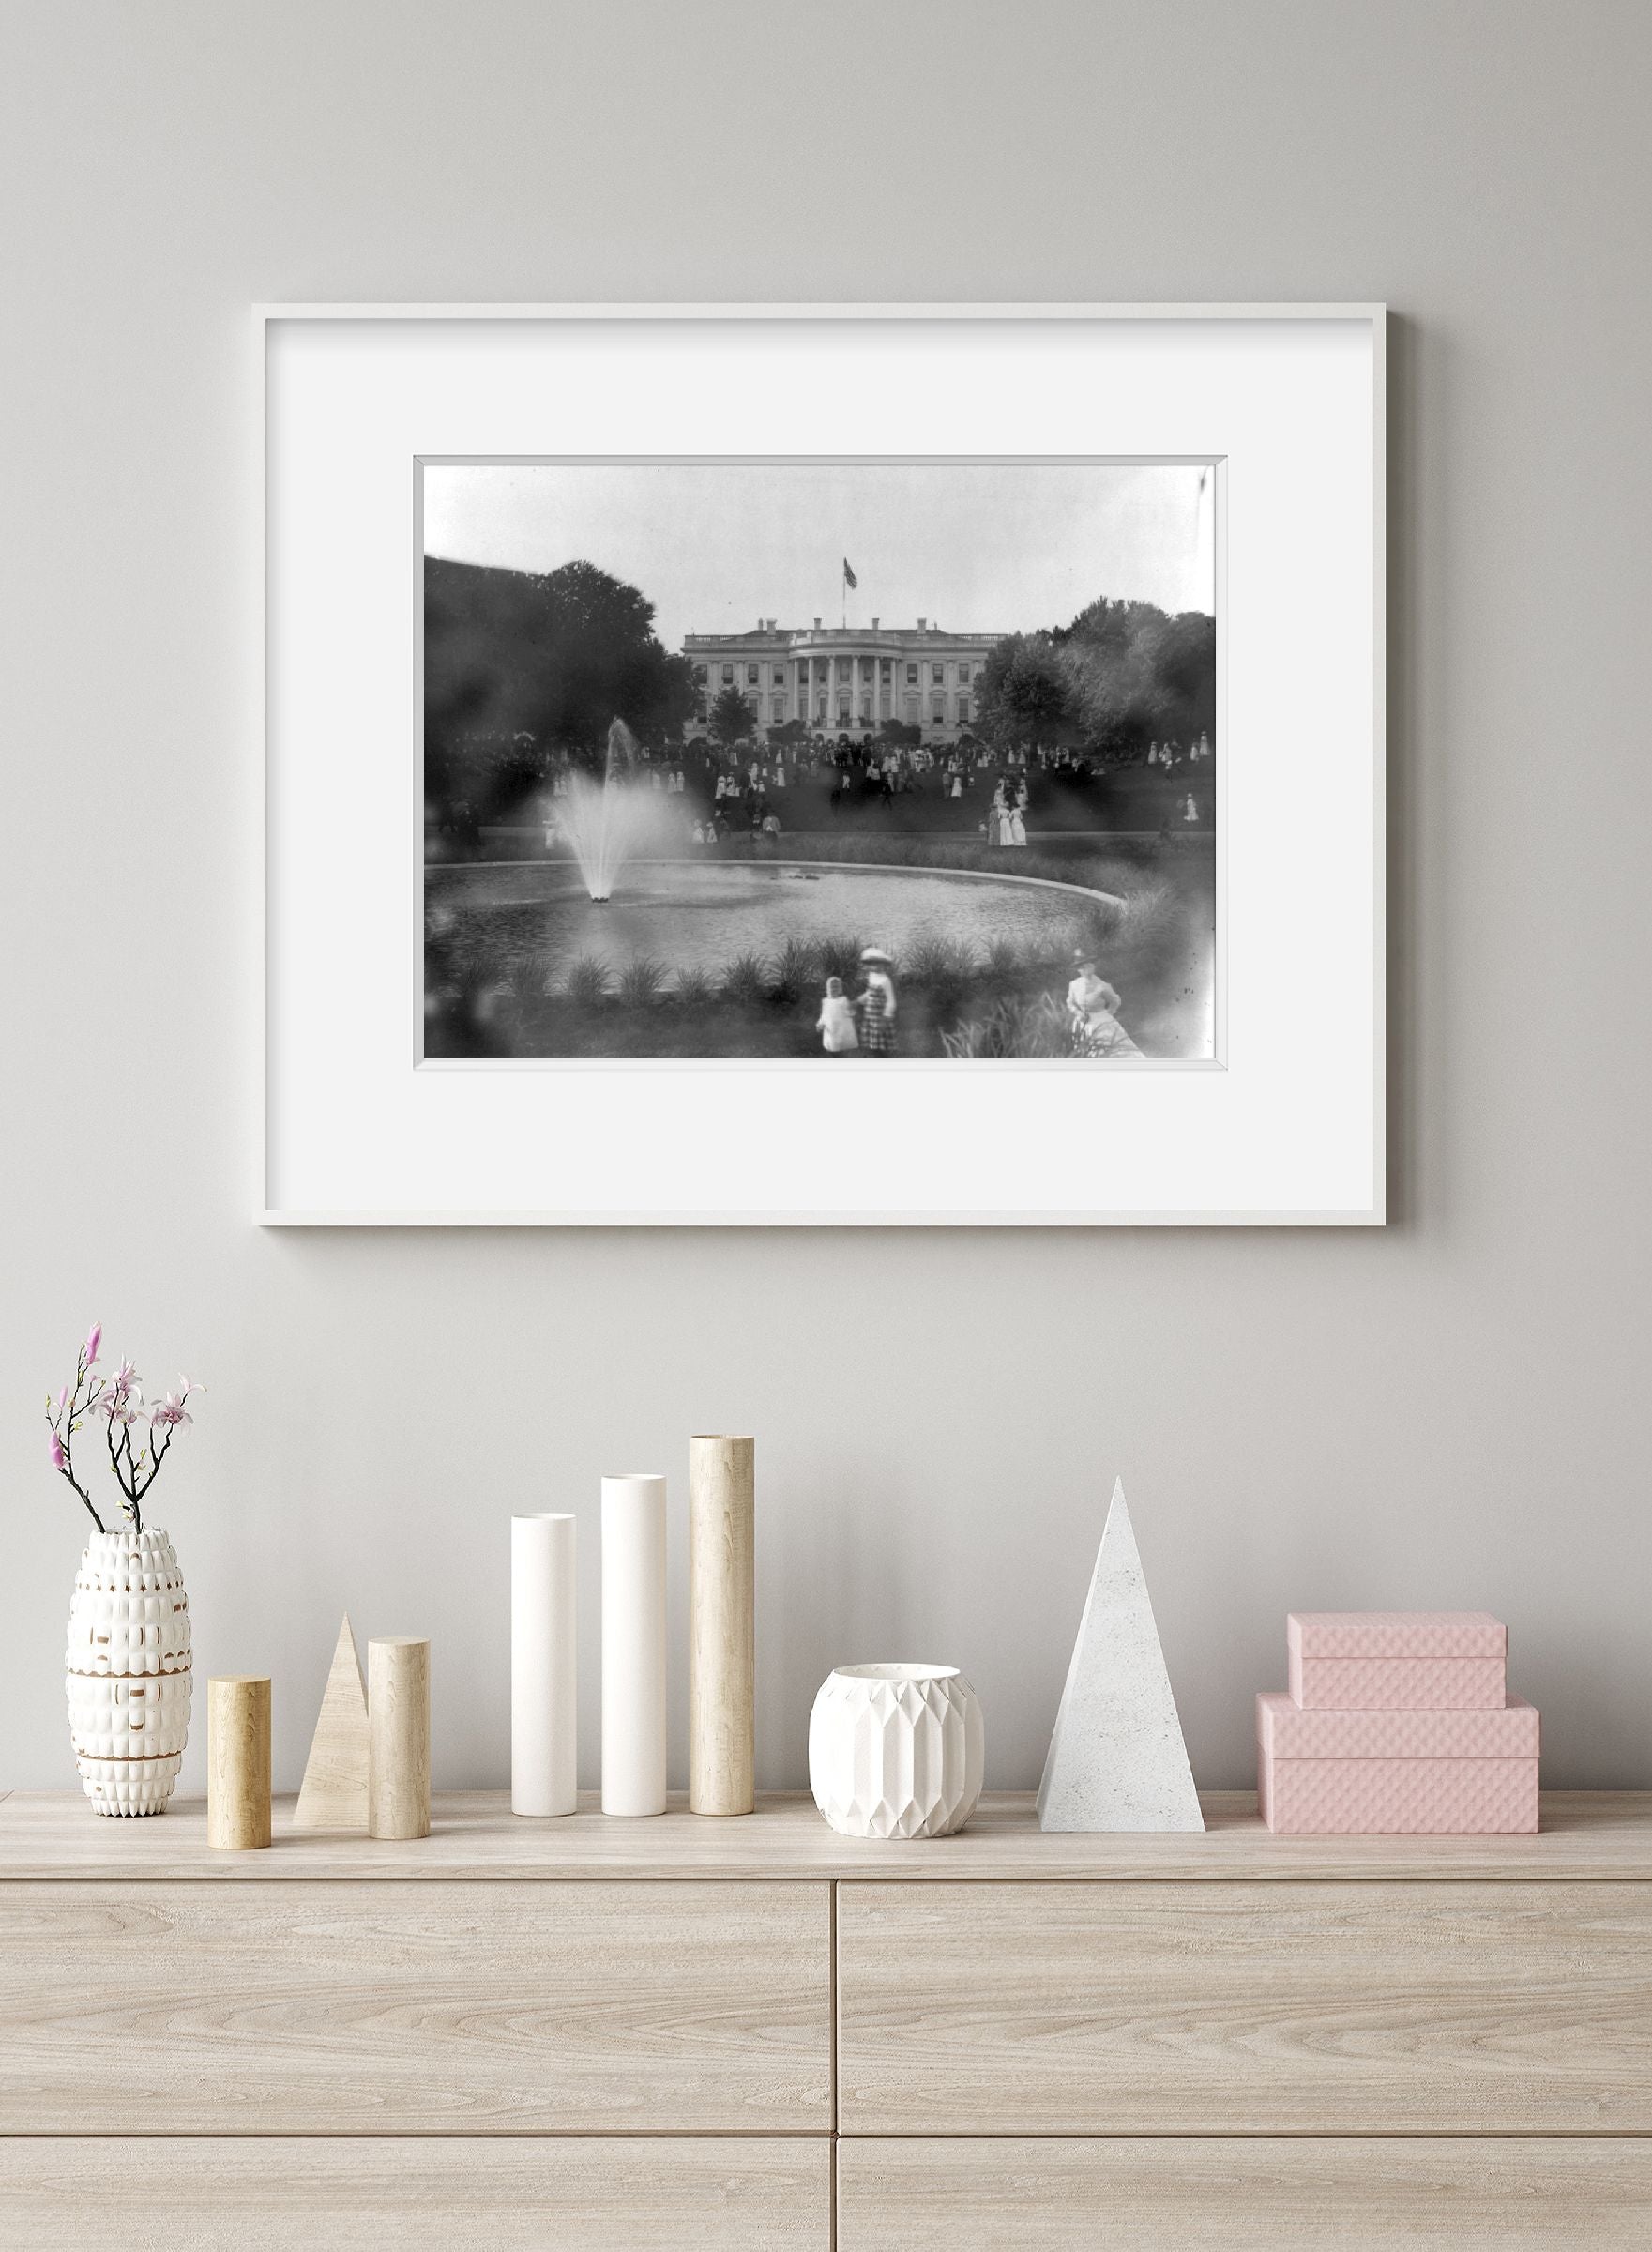 ca. 189- photograph of Wash., D.C. White House looking across pool and South Law